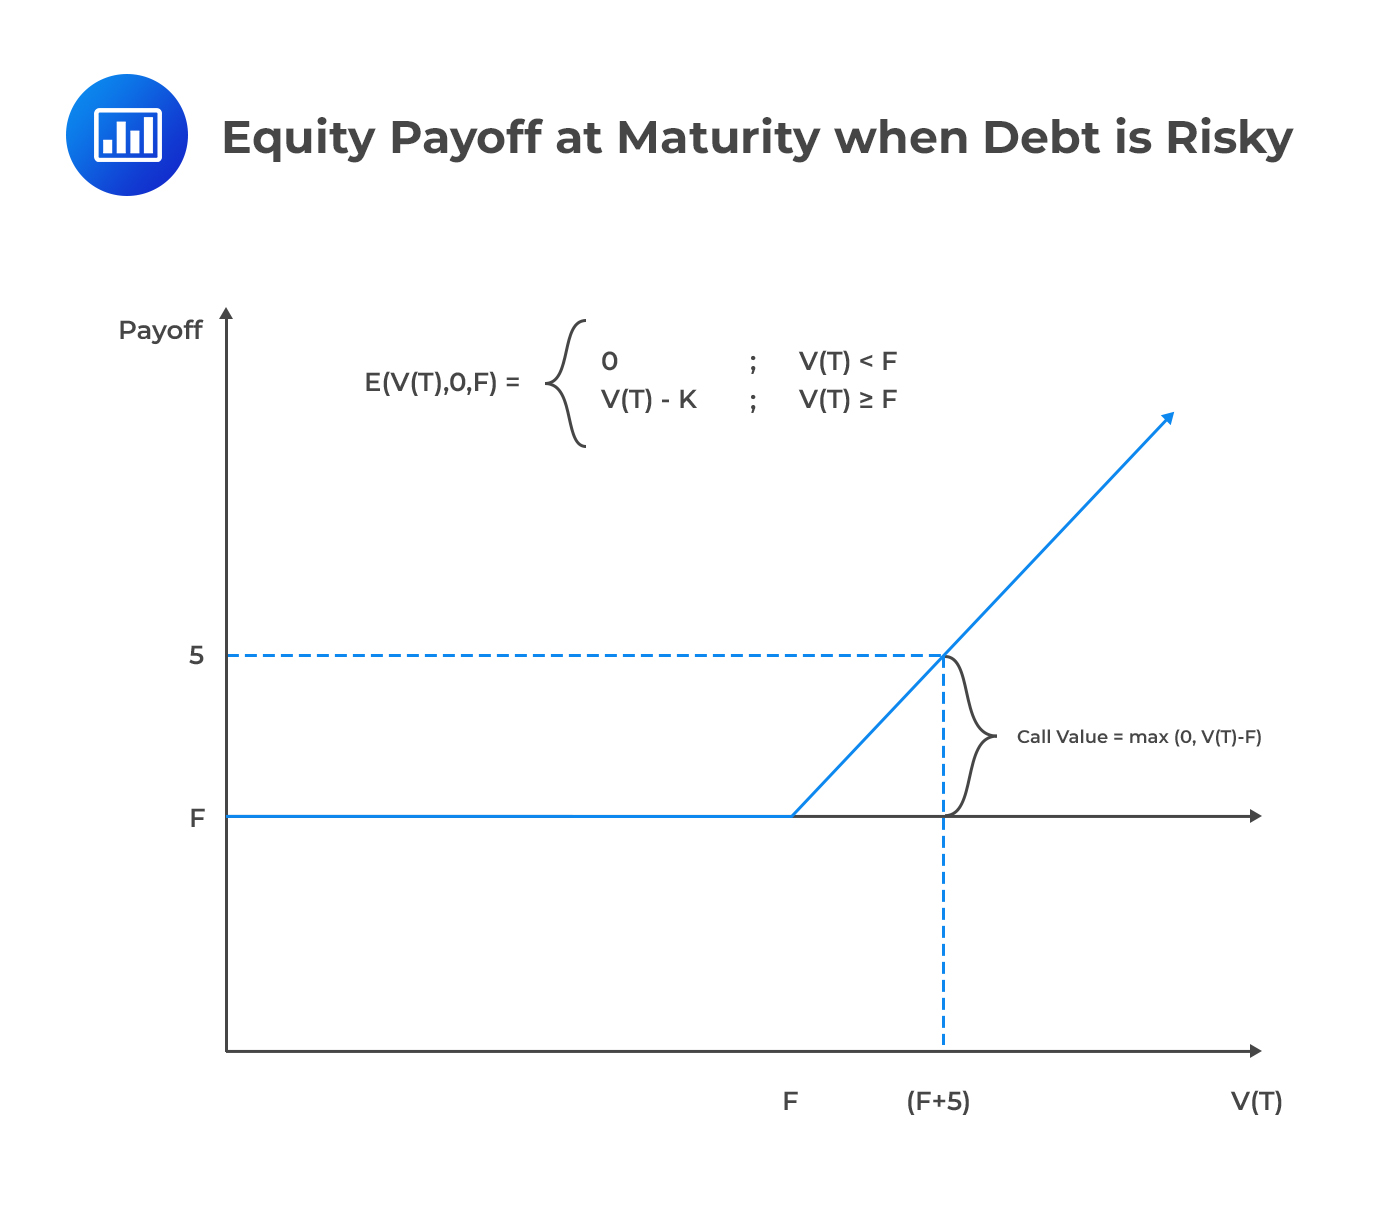 Equity Payoff at Maturity when Debt is Risky